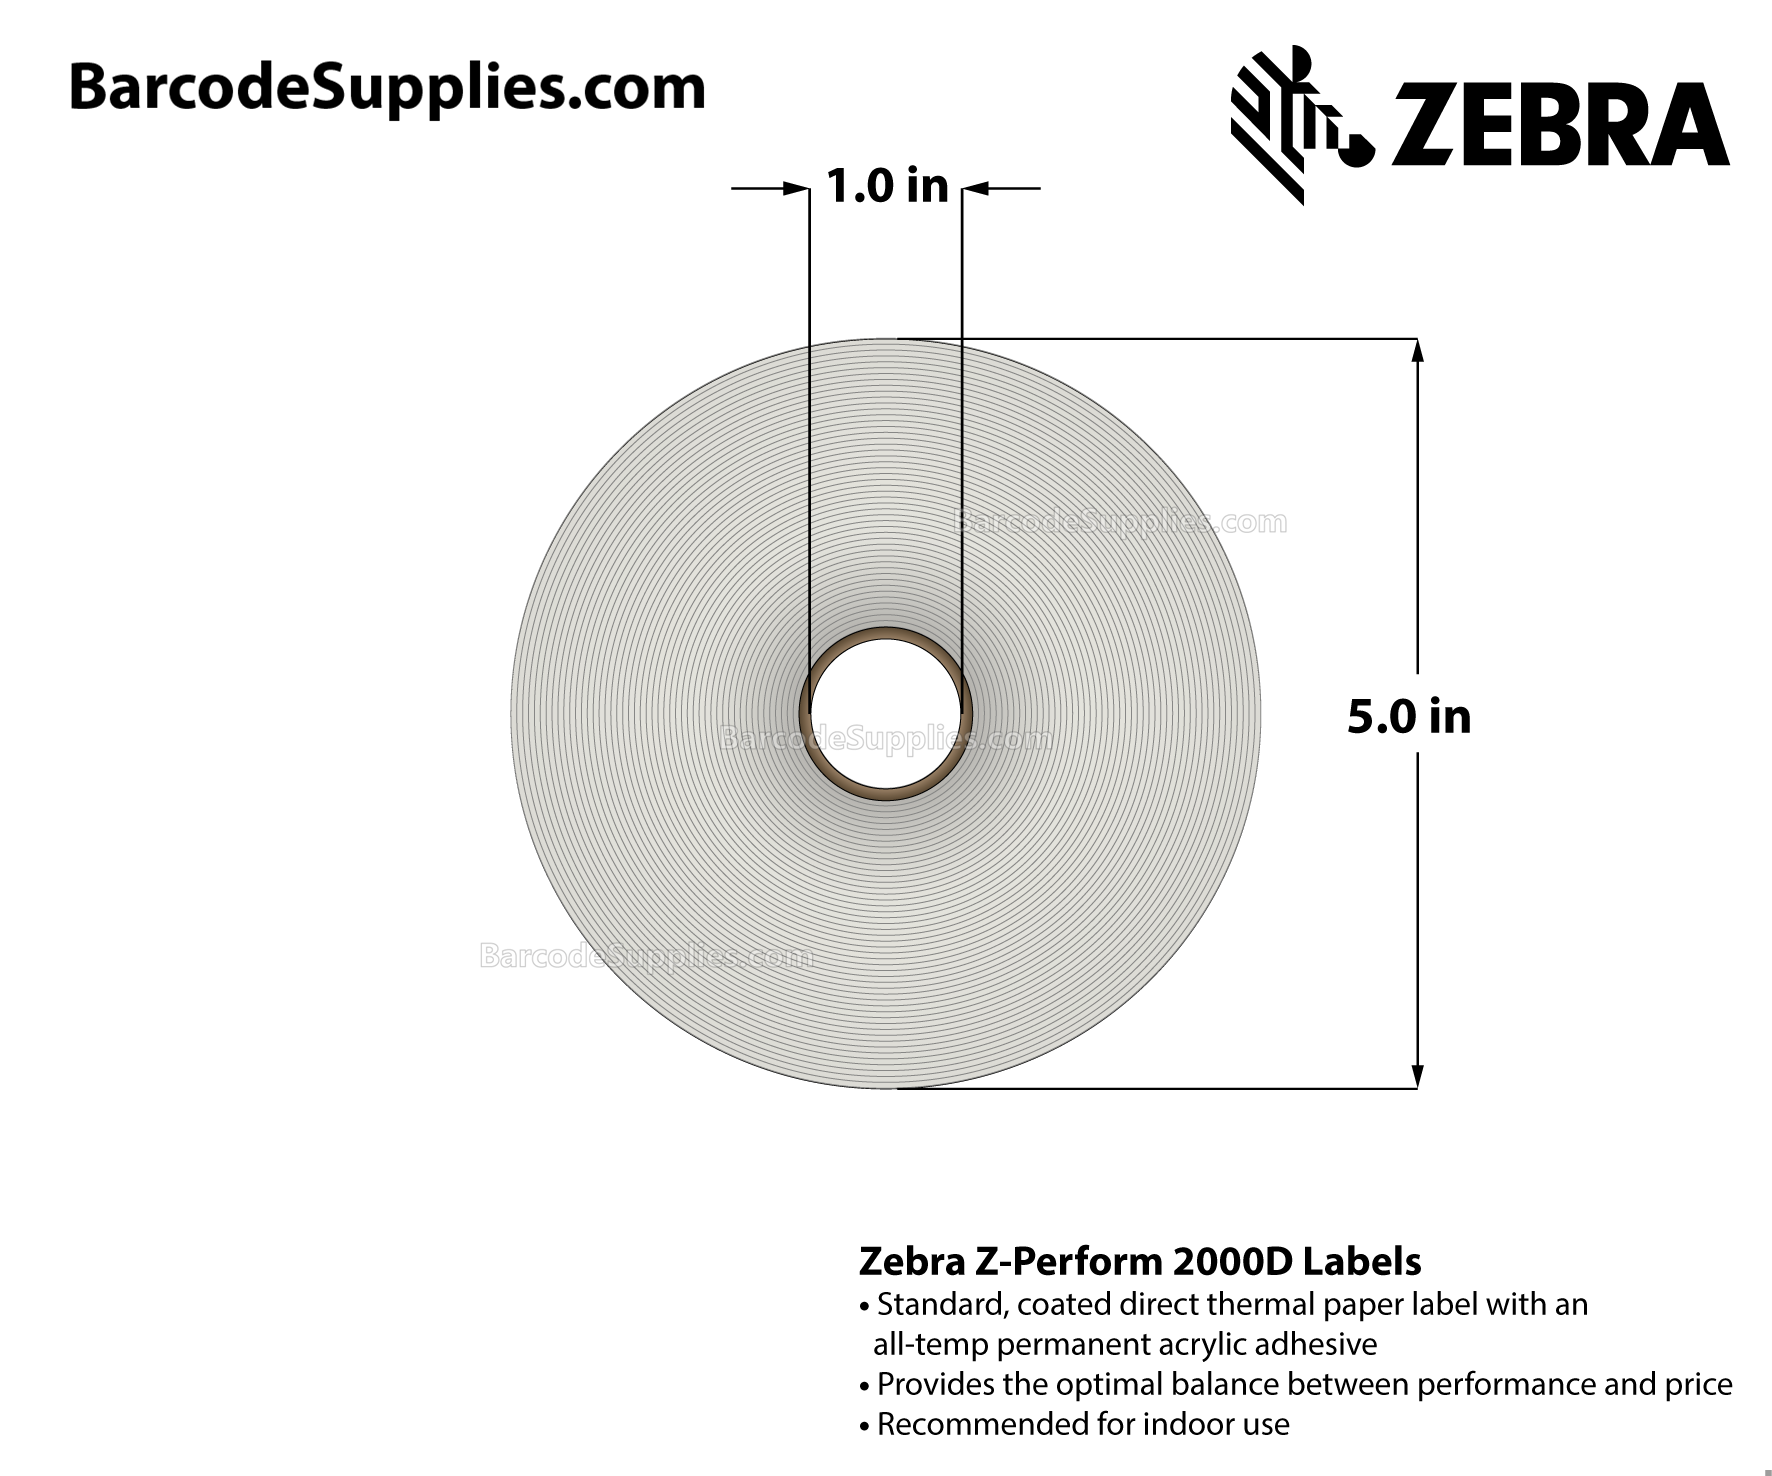 4 x 2 Direct Thermal White Z-Perform 2000D (No Perf) Labels With All-Temp Adhesive - Not Perforated - 1240 Labels Per Roll - Carton Of 6 Rolls - 7440 Labels Total - MPN: 10012163